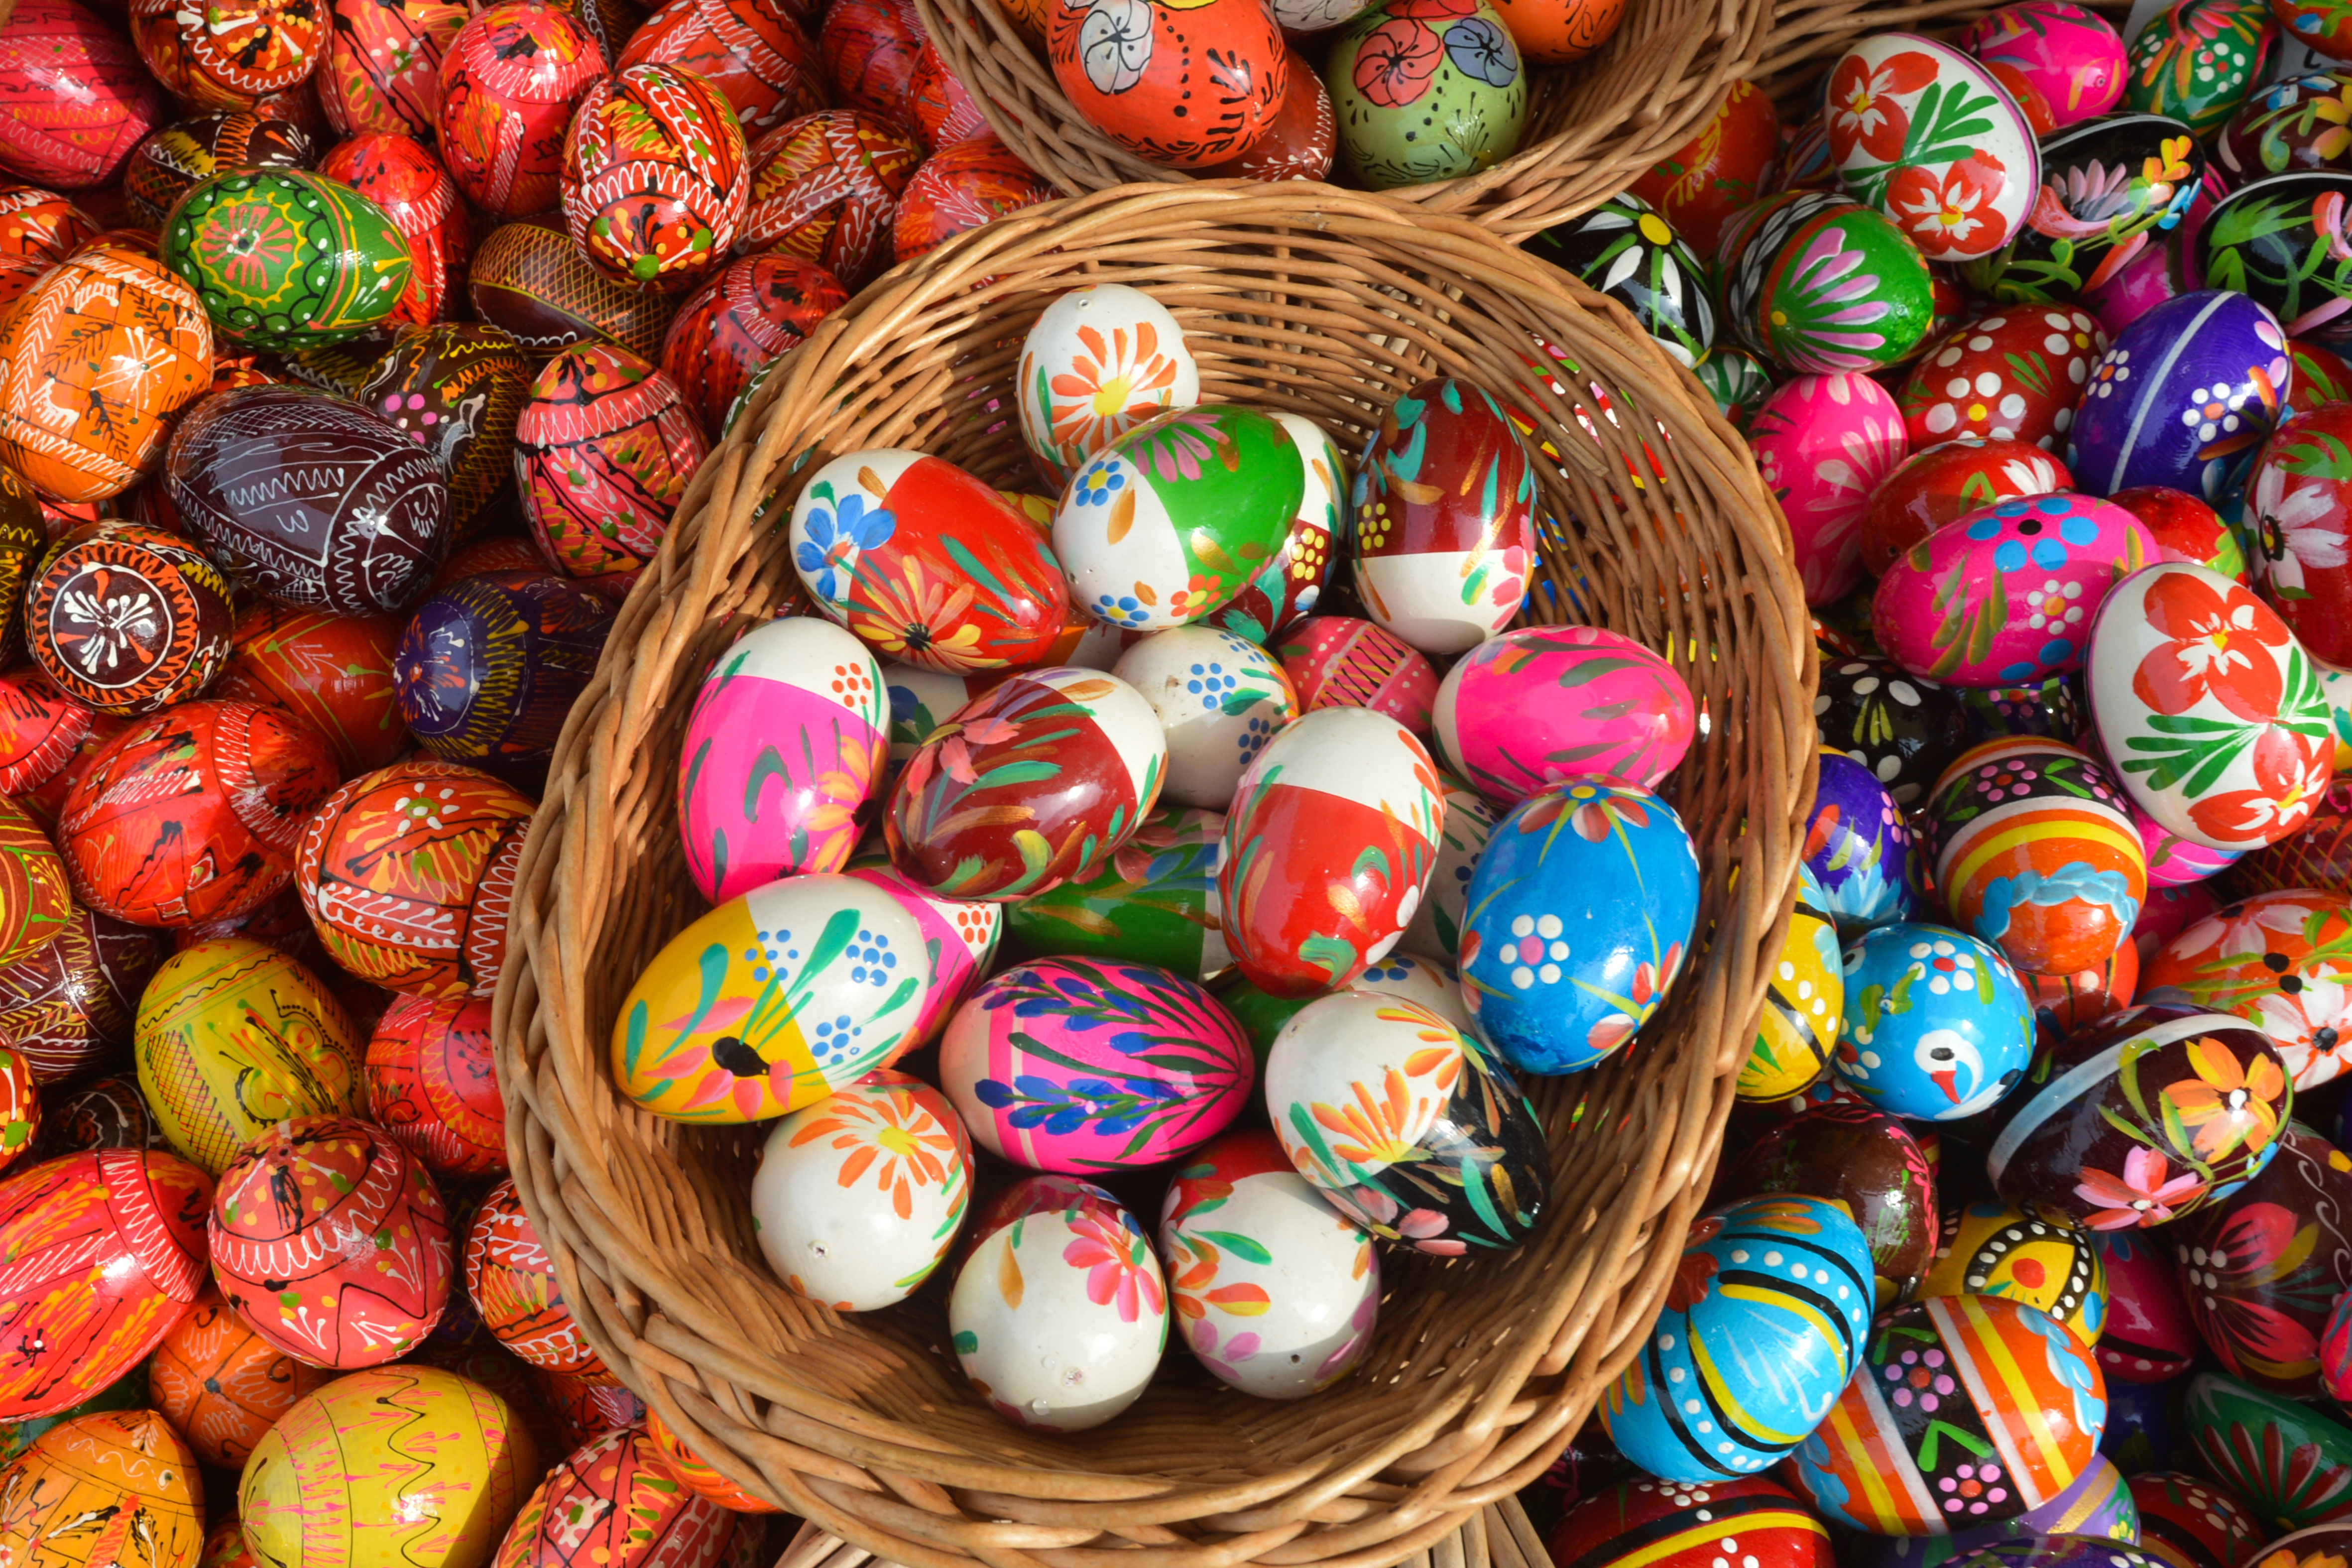 Hand made traditional hand painted Easter eggs (Polish: Pisanki) and baskets on display for sale on Krakow's Easter market. (NurPhoto—NurPhoto via Getty Images)